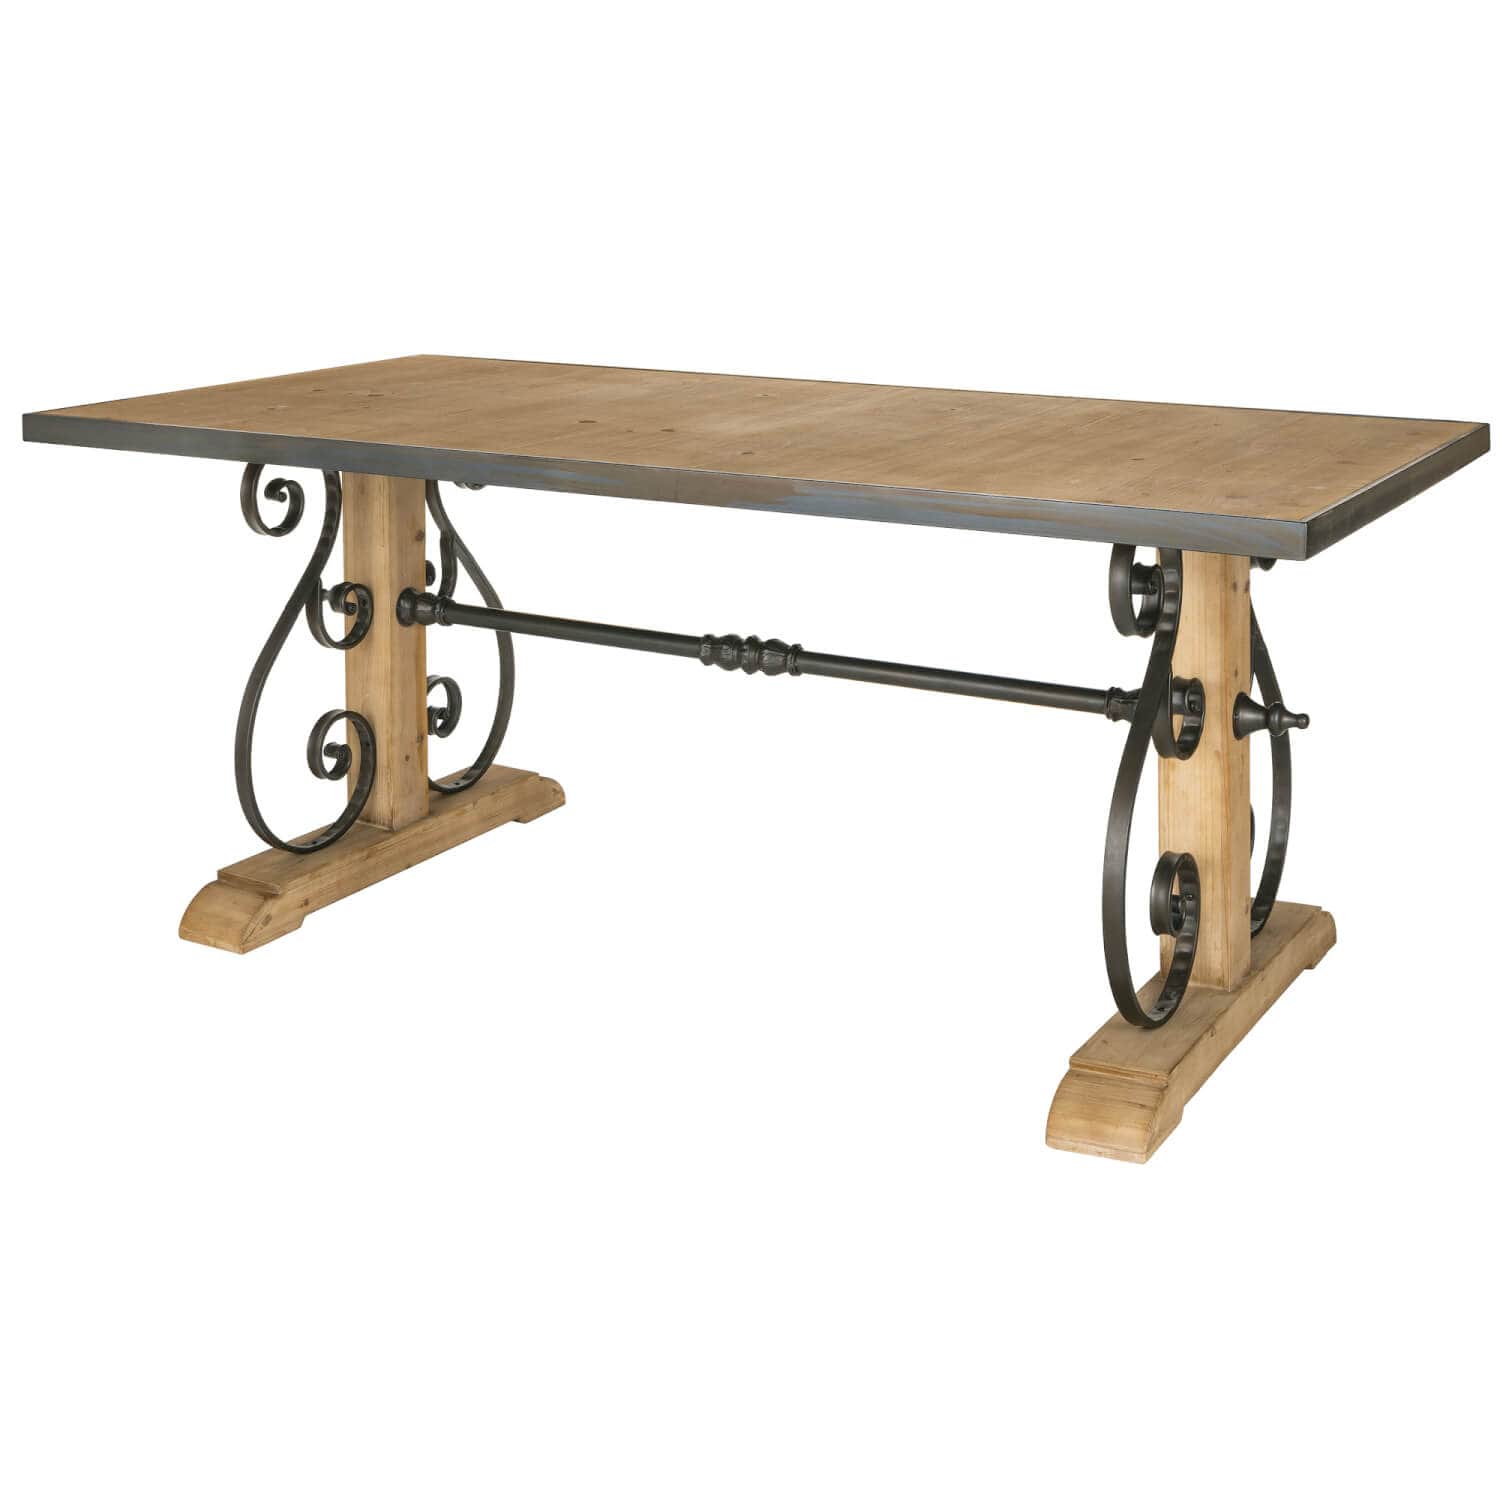 French Country Table Elevate Home Decor - Furniture